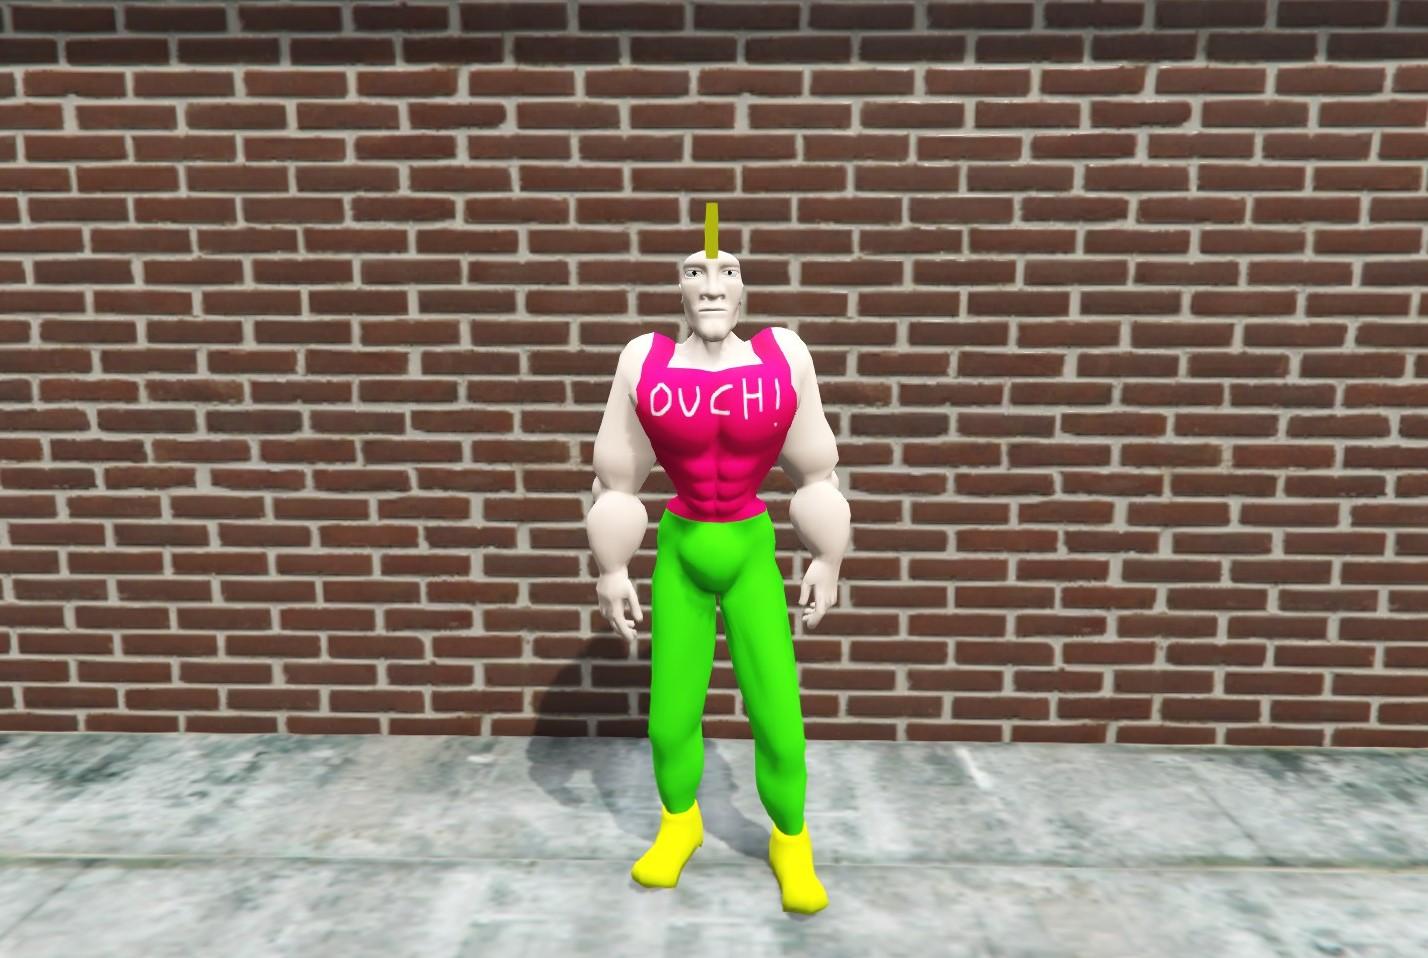 Just found out there's a GigaChad outfit for the Xbox Original